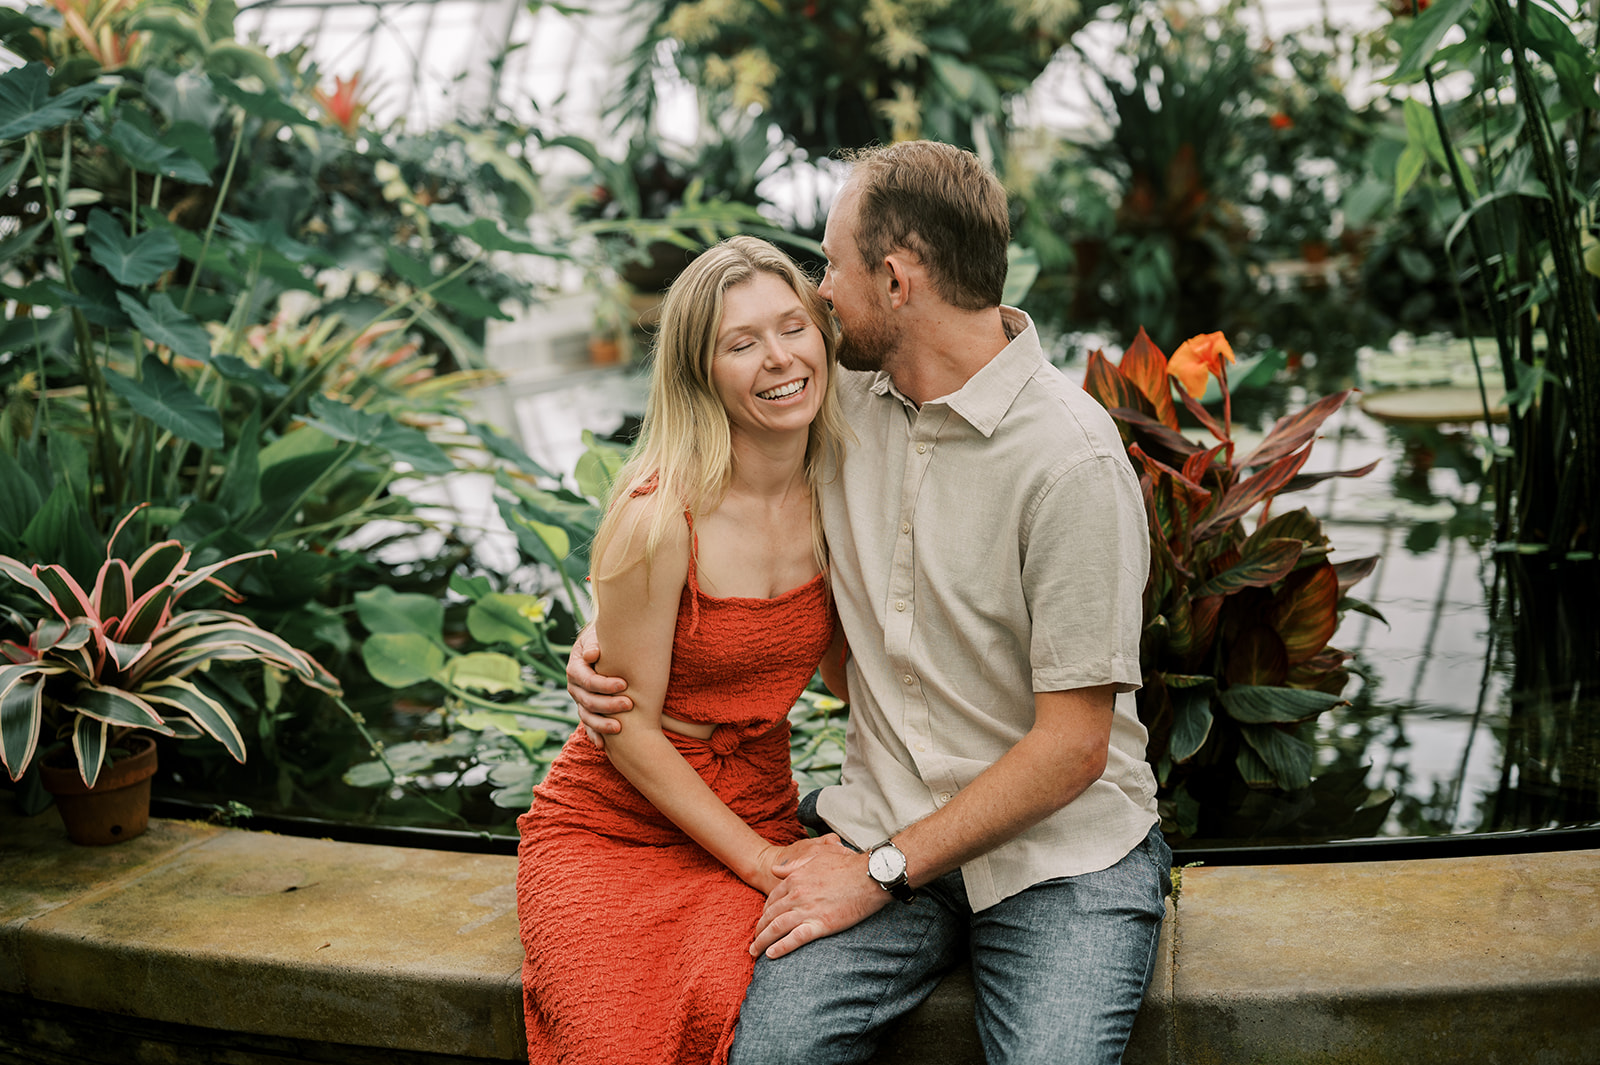 Tropical-inspired engagement session at San Francisco's Conservatory of flowers. 